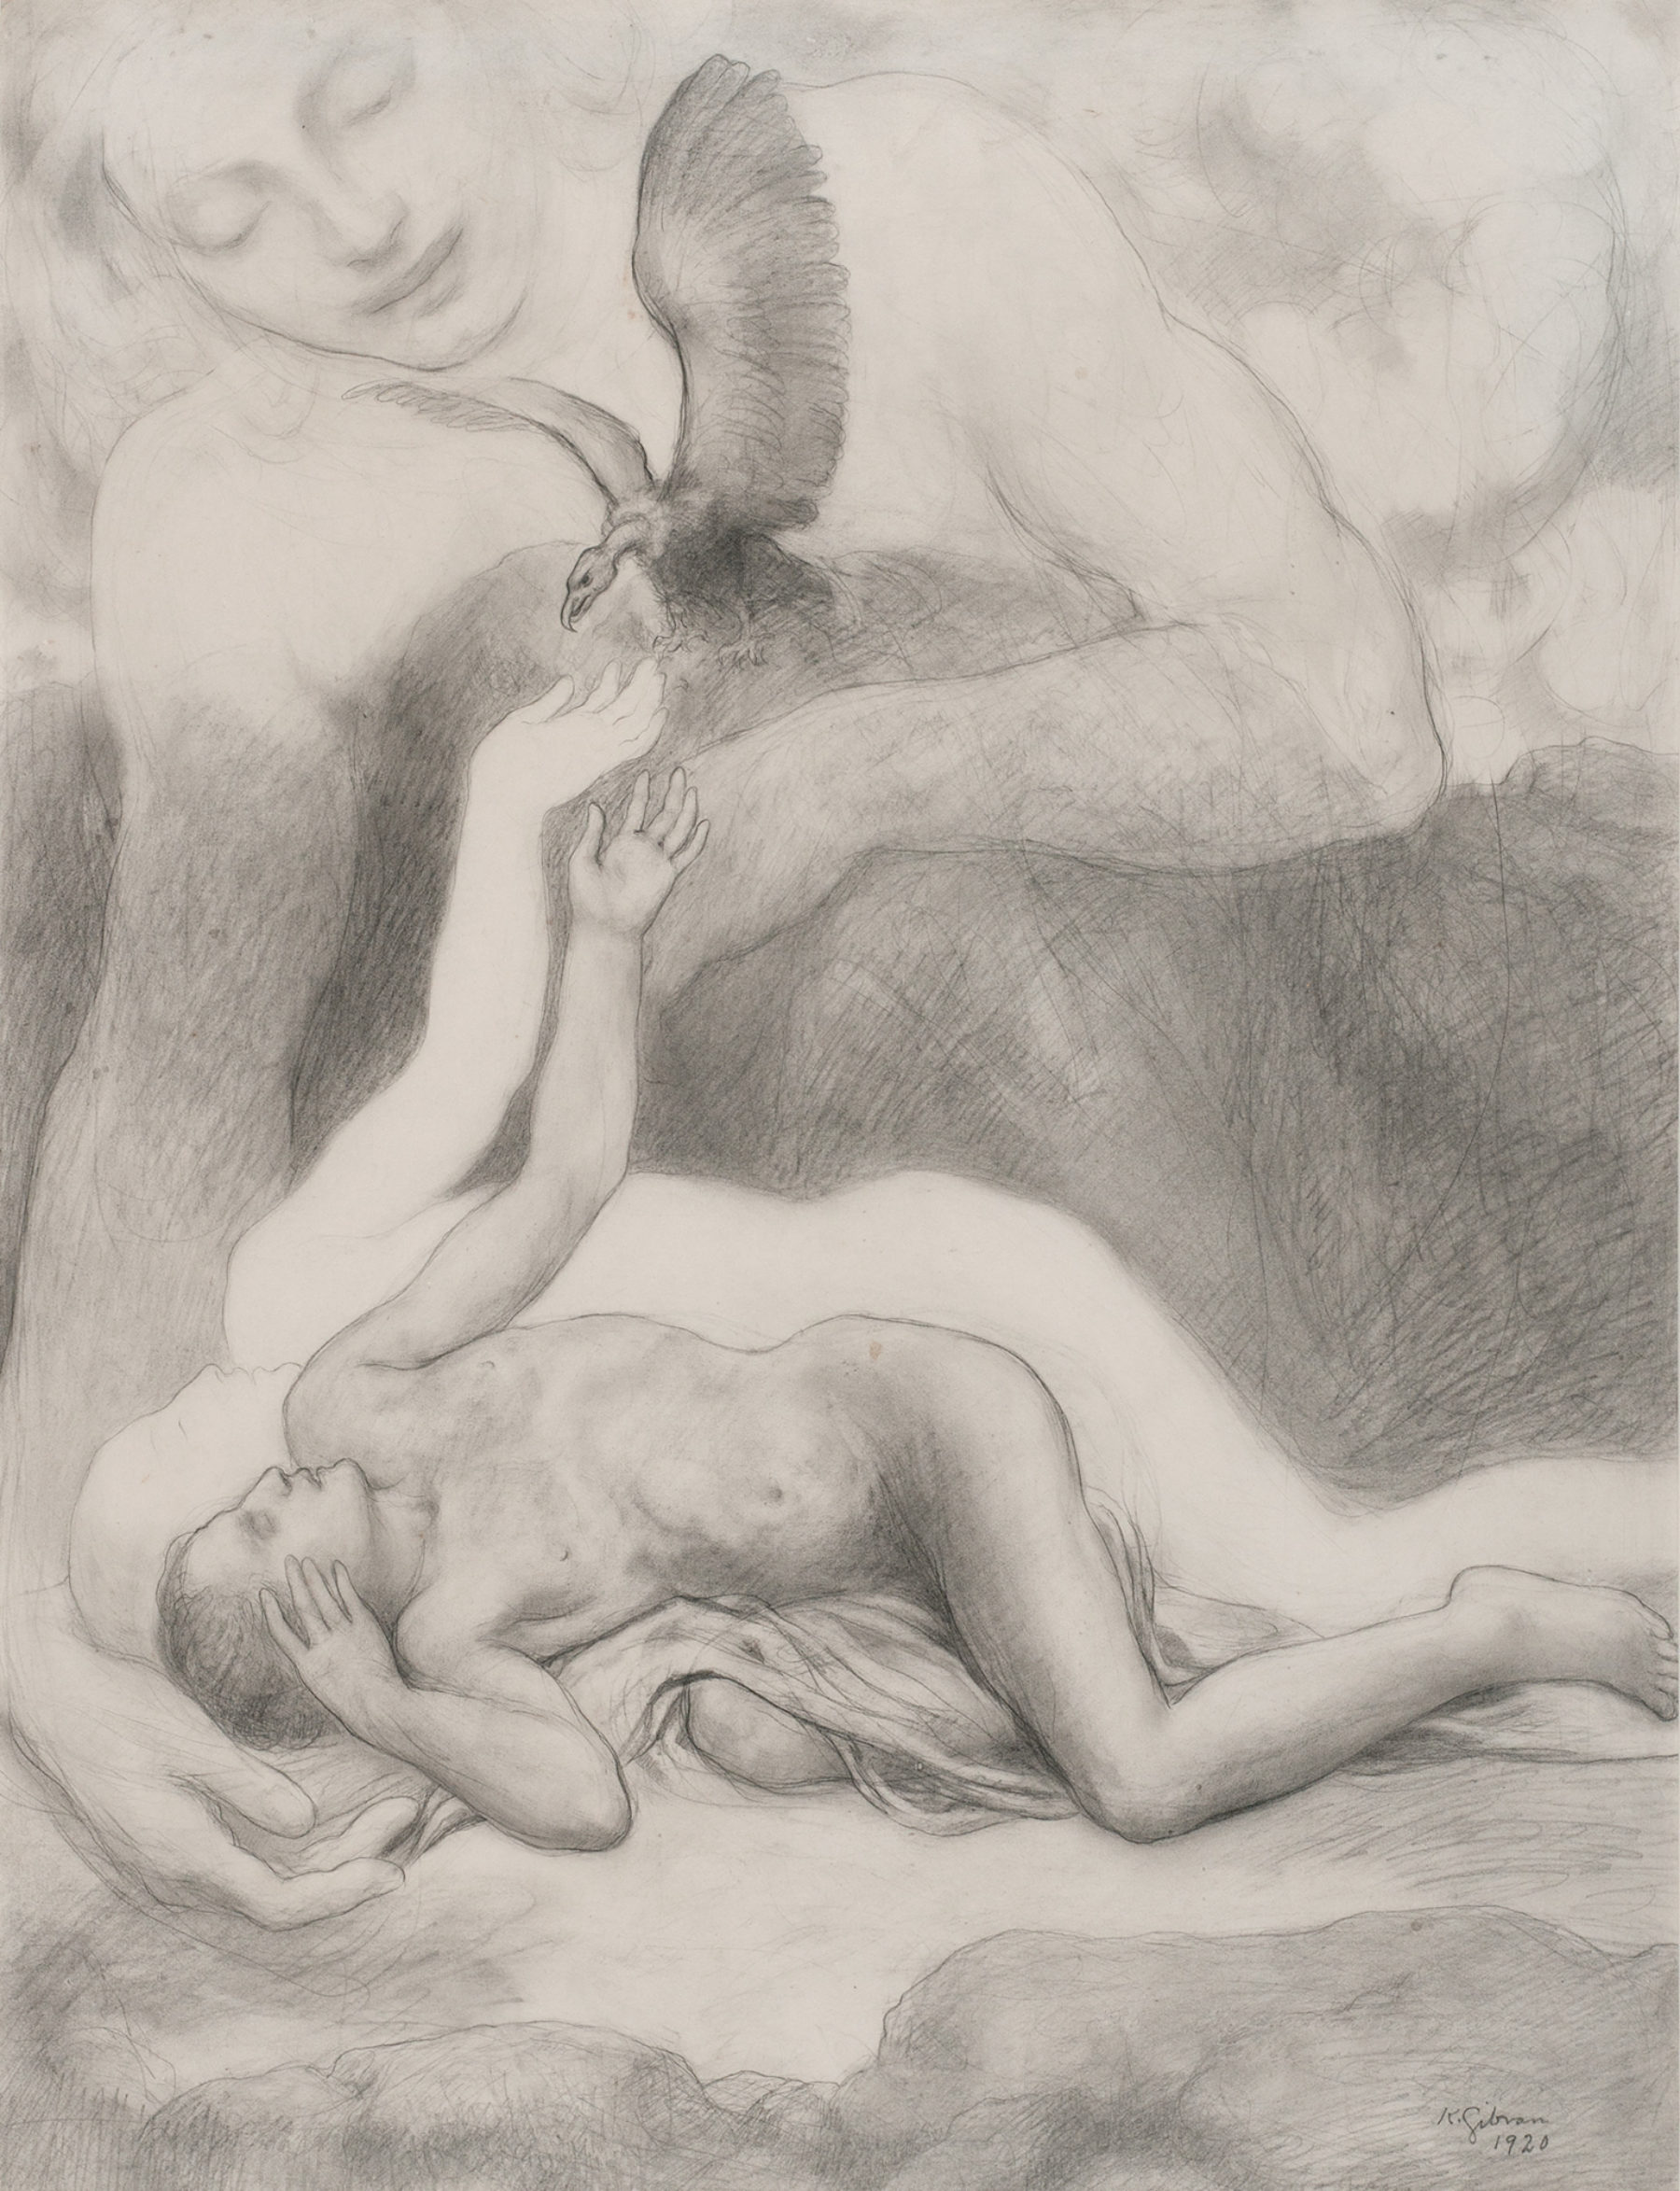 Kahlil Gibran, The Dying Man and the Vulture, 1920. Pencil on paper, 22 x 16 3/4 inches (55.9 x 42.5 cm). Telfair Museum of Art, Savannah, Georgia, Gift of Mary Haskell Minis. Photography by Daniel L. Grantham, Jr., Graphic Communication